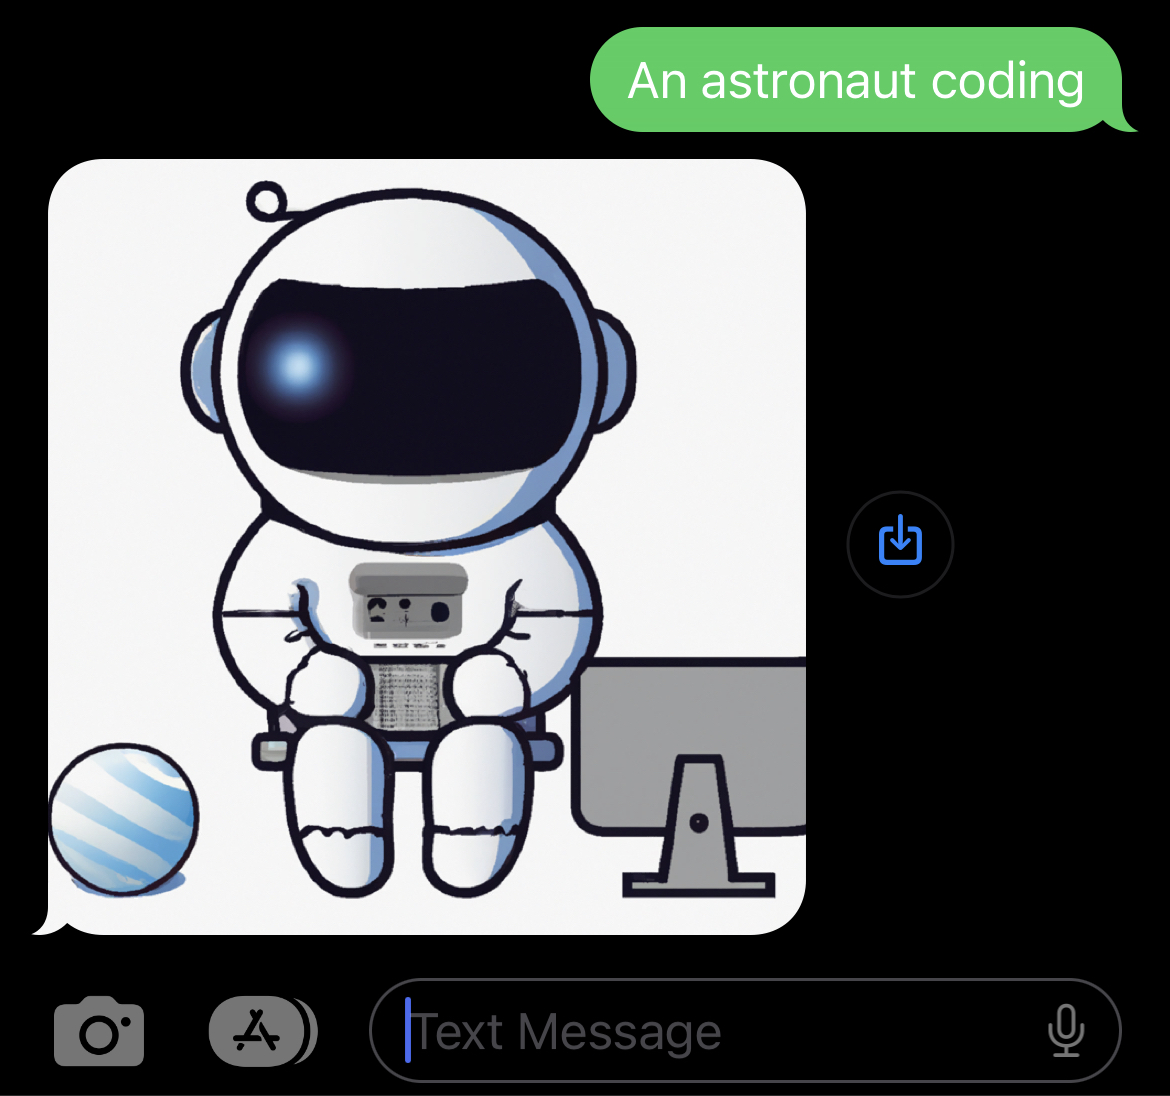 DALLE generated image - An astronaut coding